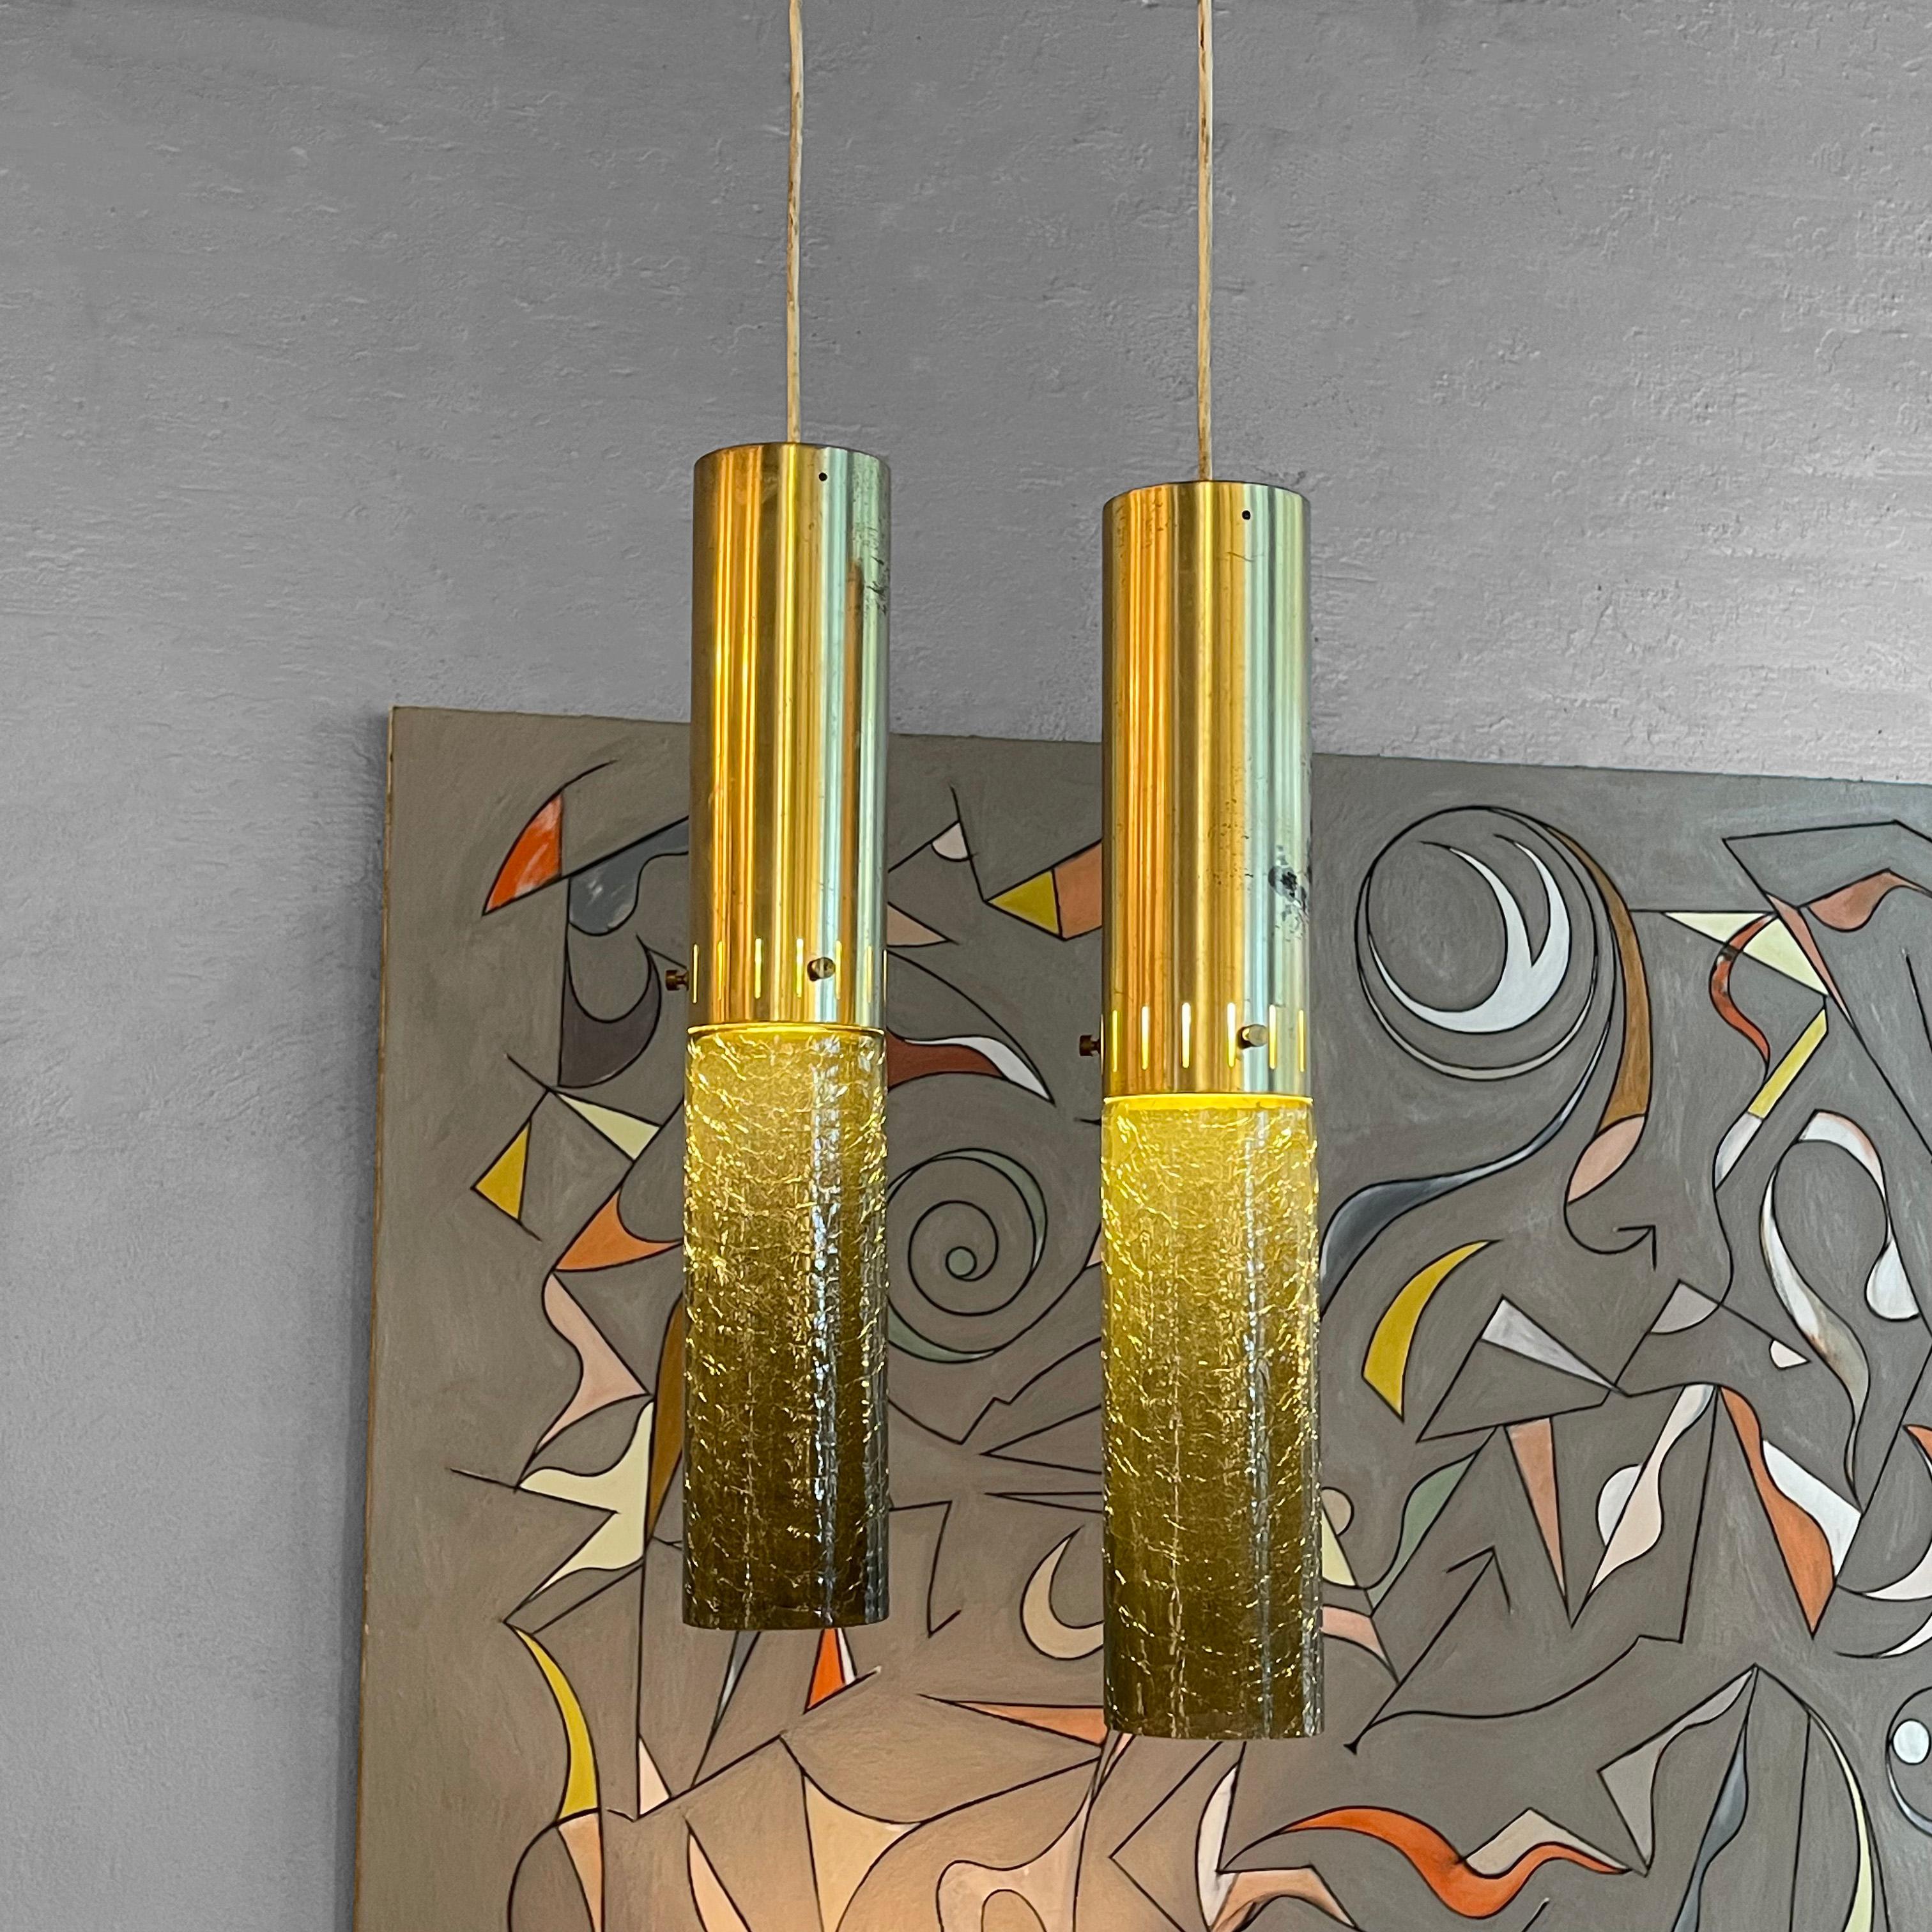 Pair of Mid-Century Modern pendants feature textured, green glass cylinders with perforated anodized aluminum tops and matching canopies. The pendants hang at 42 inches overall.